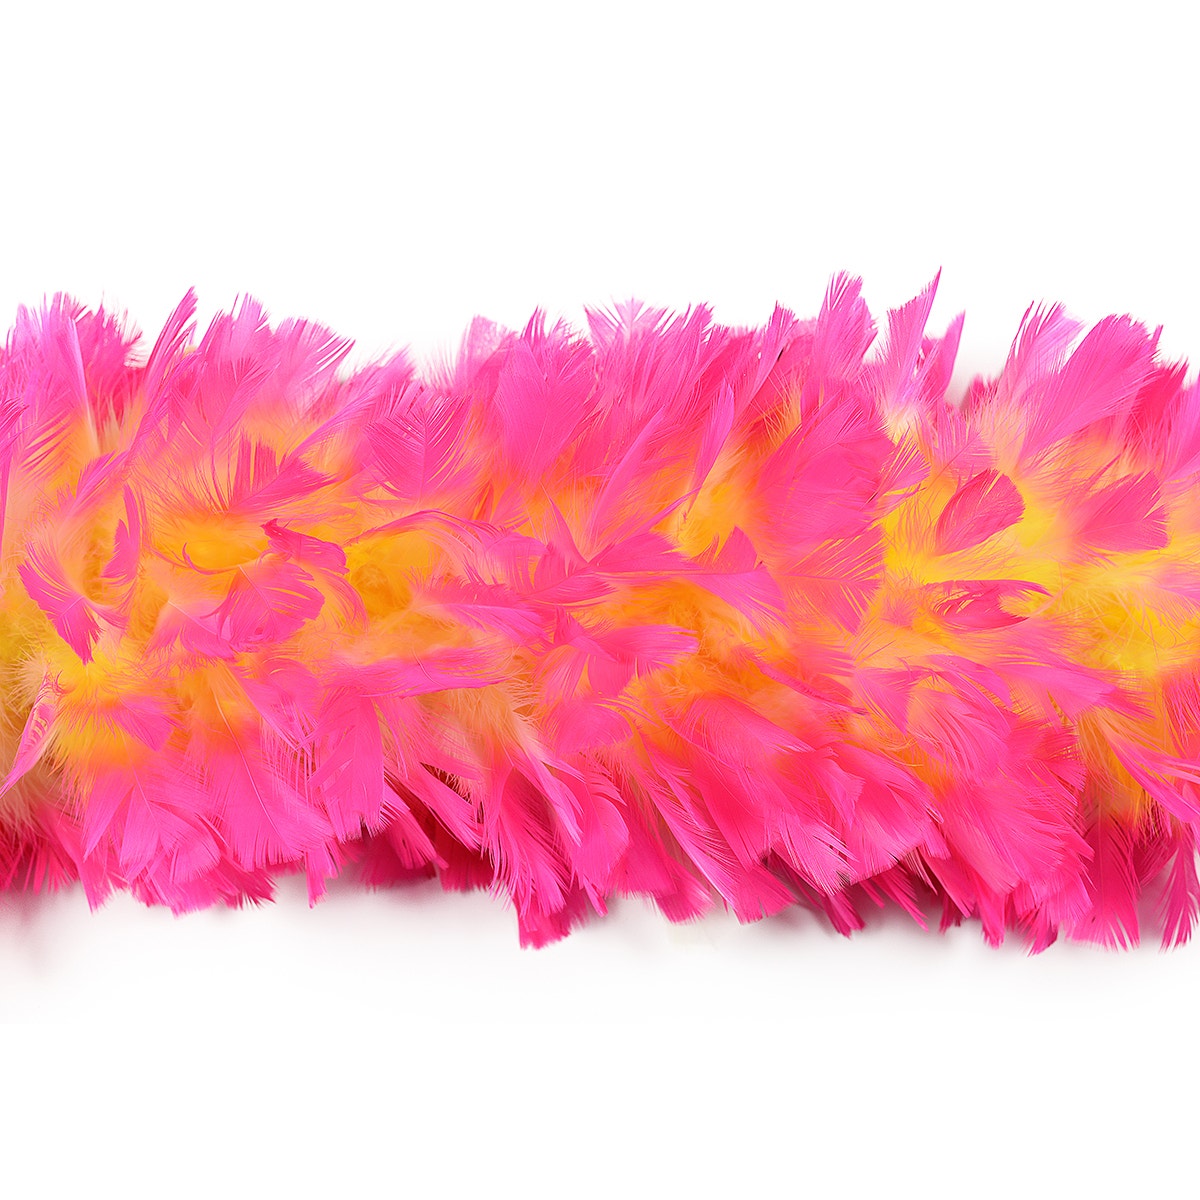 Turkey Feather Boa 10-14" - Fluorescent Yellow/Pink Orient Tipped